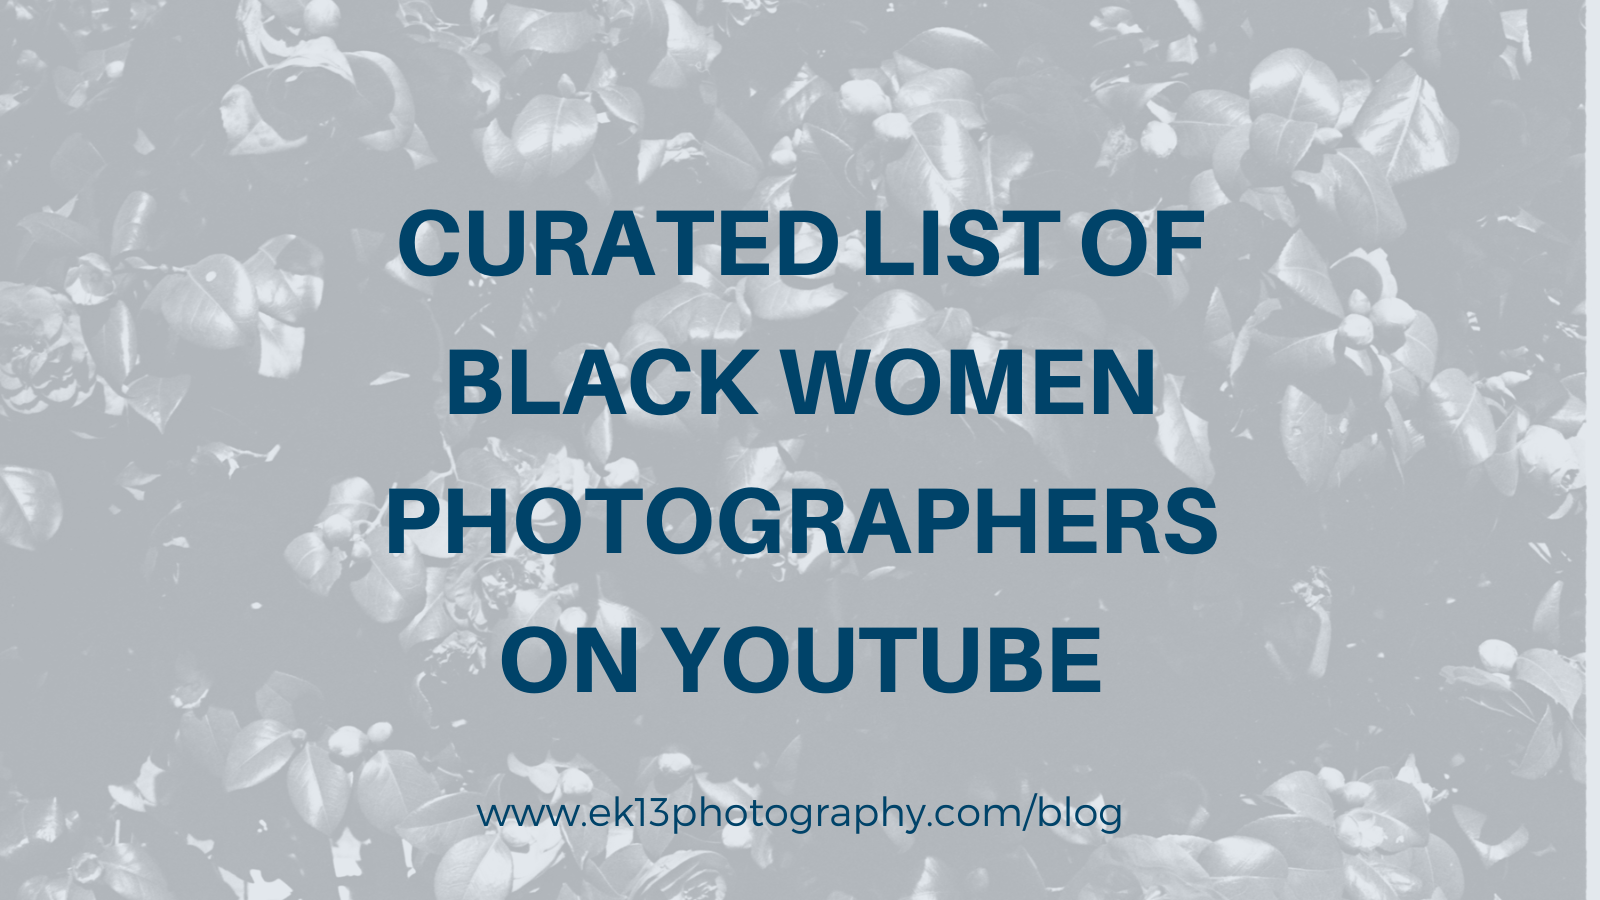 Curated List of Black Women Photographers on YouTube